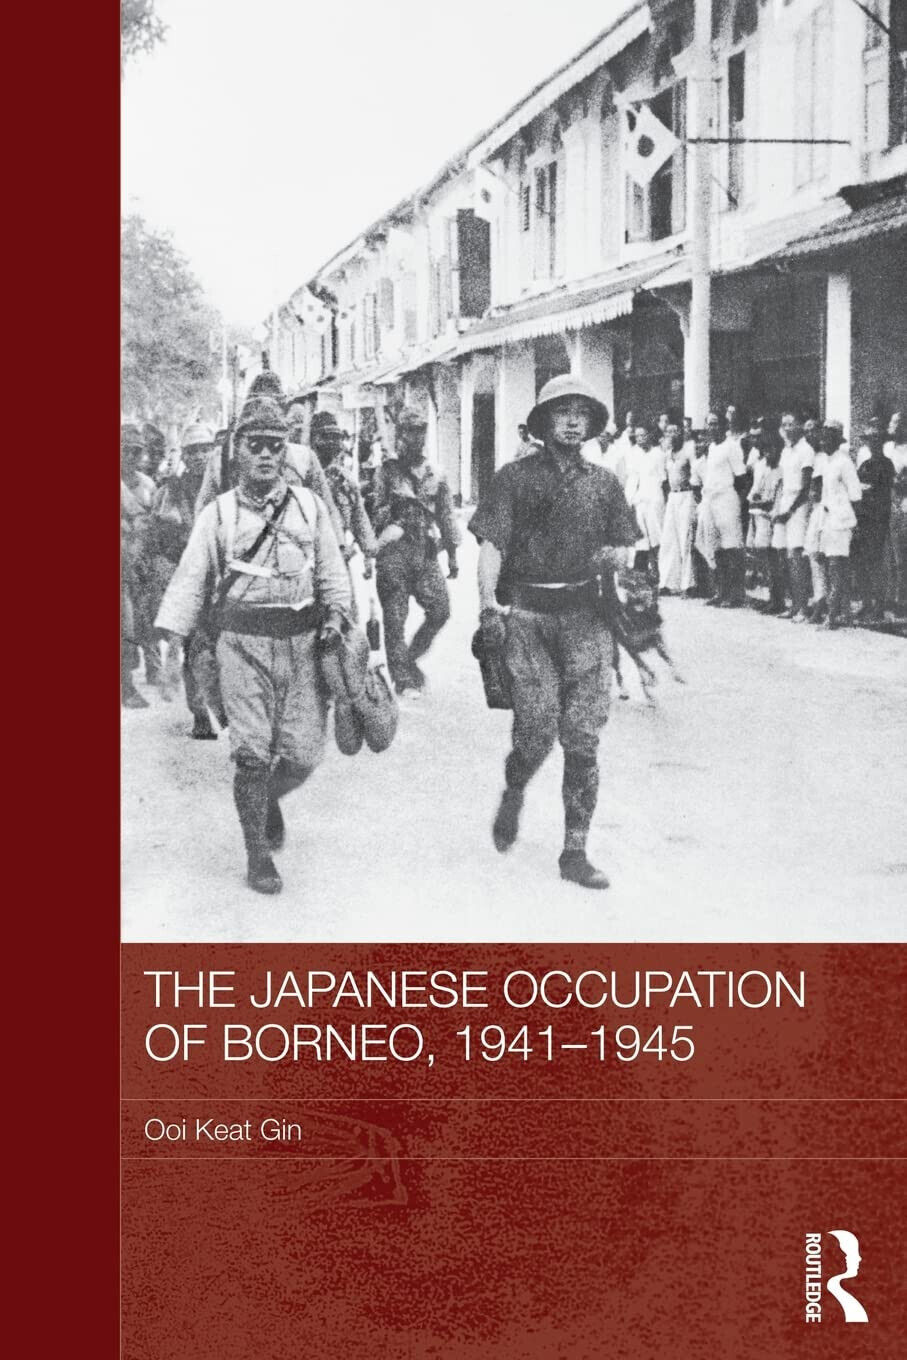 The Japanese Occupation Of Borneo, 1941-45 - Ooi Keat Gin - Routledge, 2013 libro usato